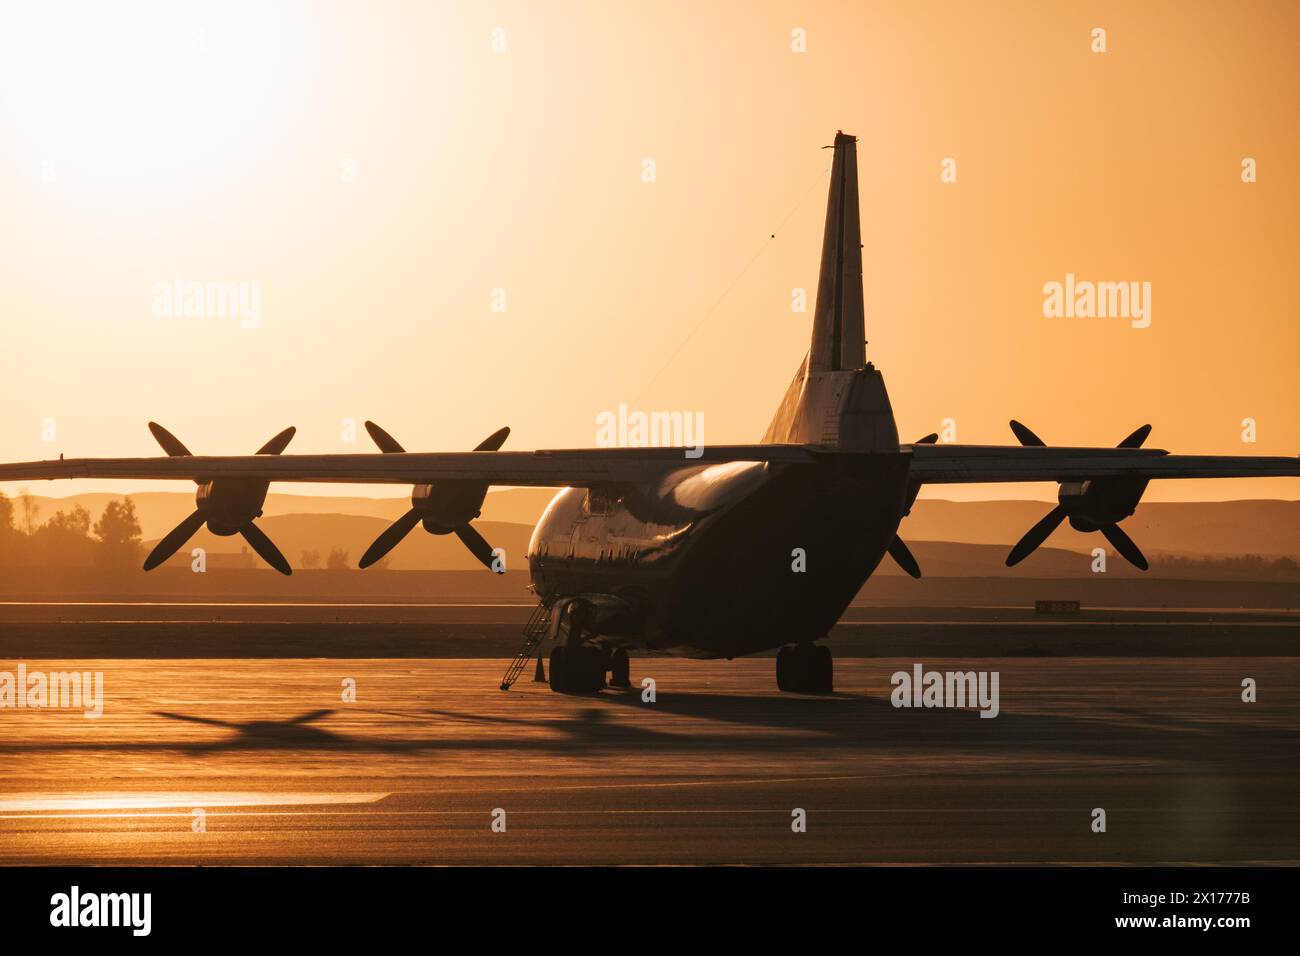 a Ukranian Antonov An-12 cargo plane of Motor Sich Airlines parked at Luxor Airport, Egypt, silhouetted against the morning sun Stock Photo